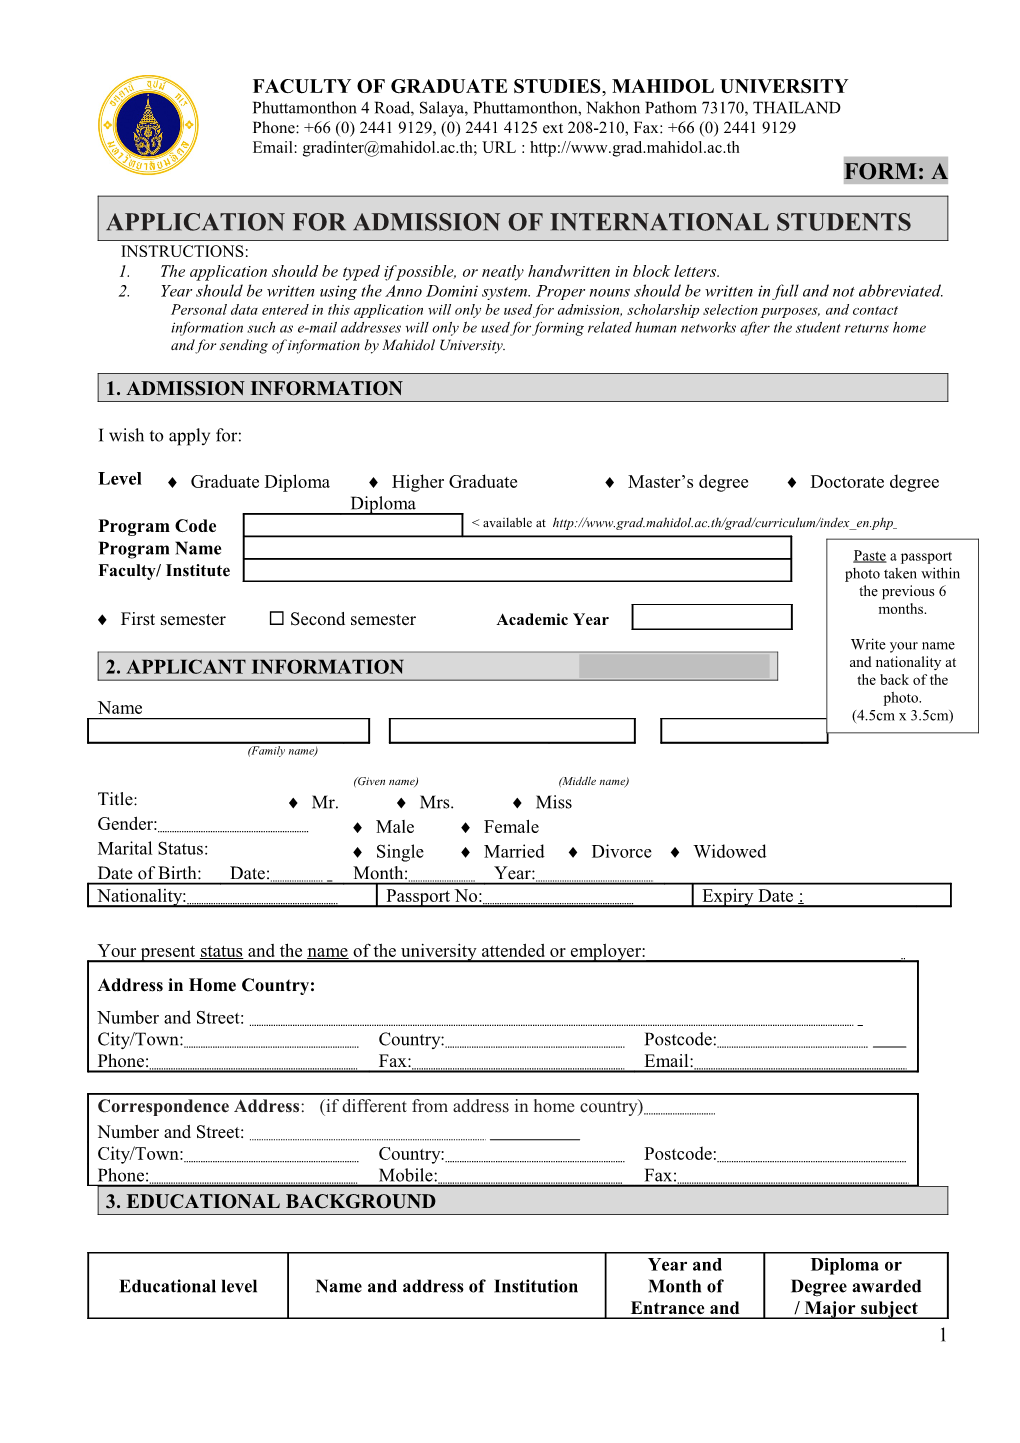 Application for Admission of International Students